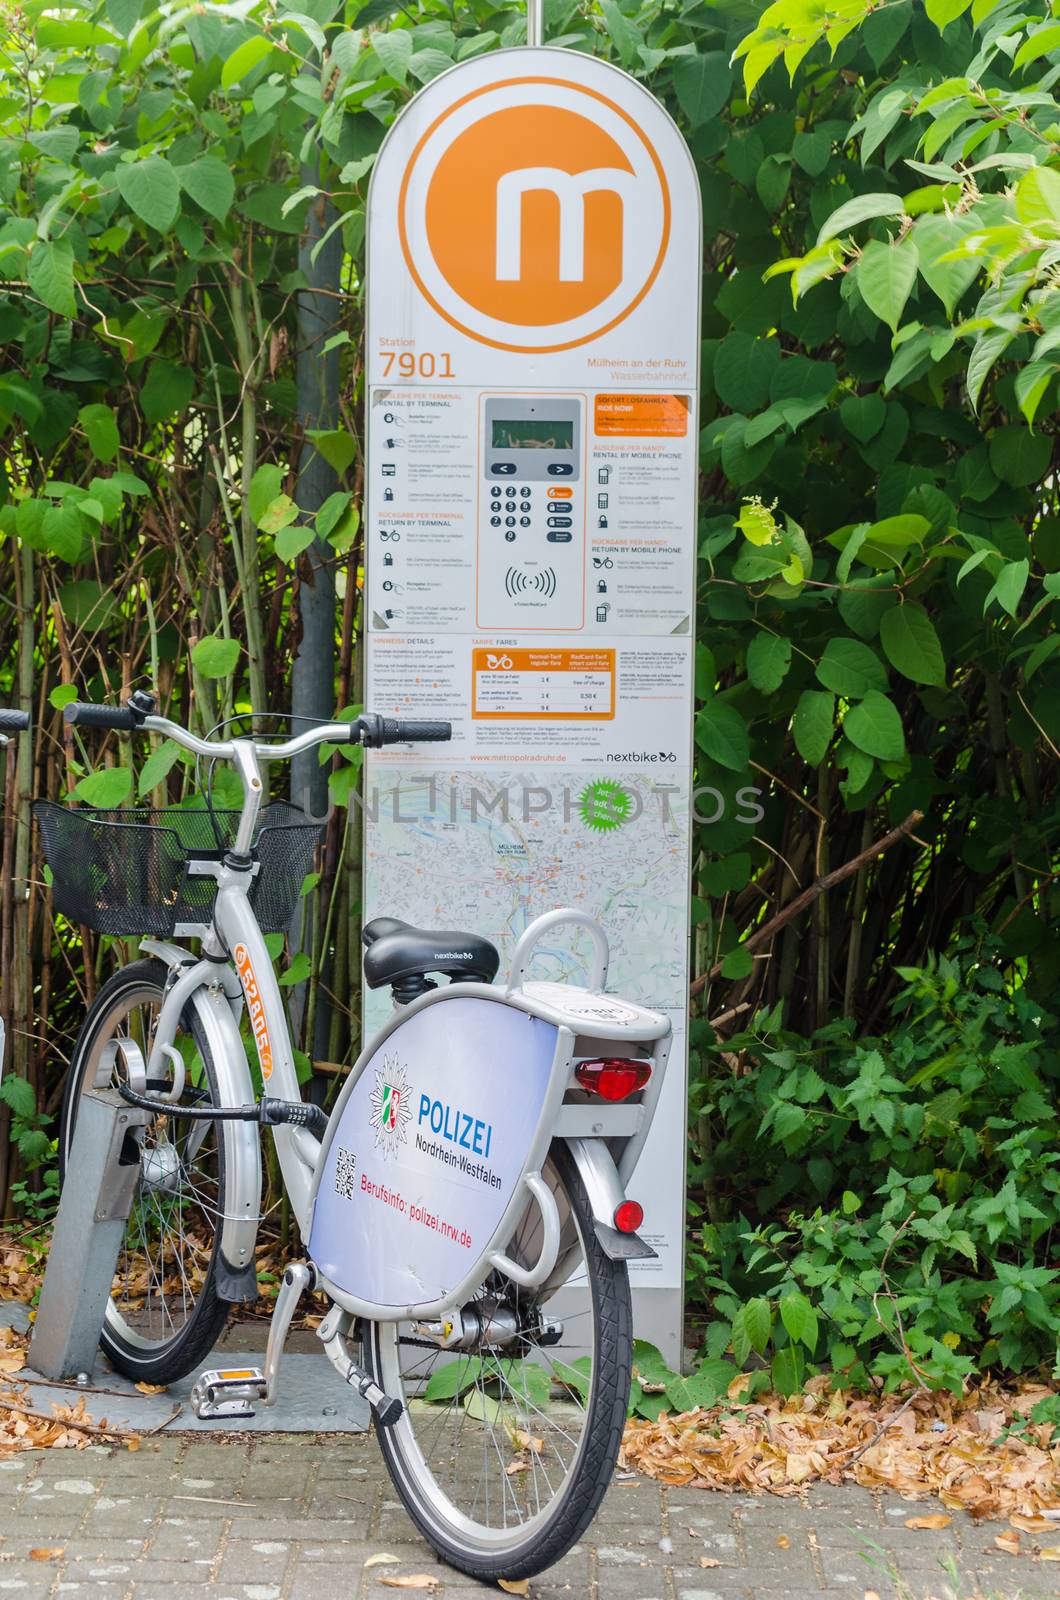 Mülheim Ruhr, Nrw, Germany - September 12, 2014: Bicycle Rental Station in Mülheim an der Ruhr. The stations are located in many cities.